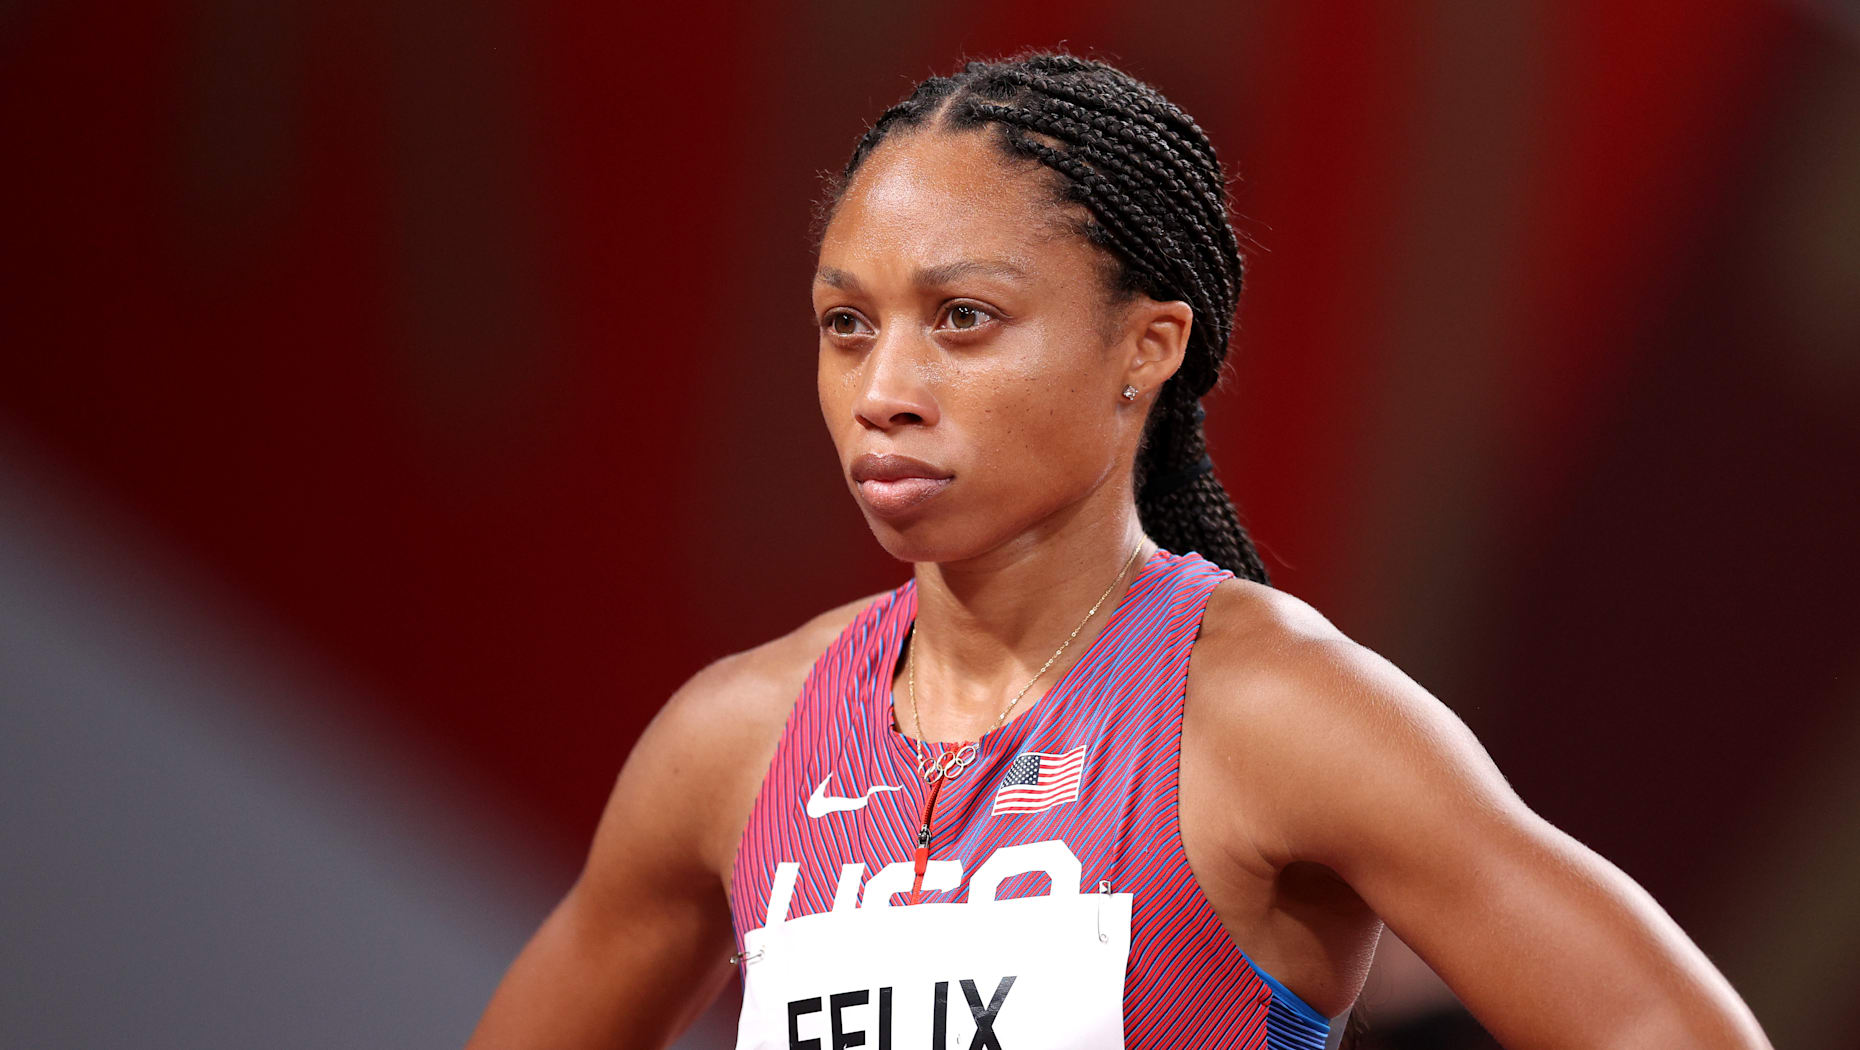 Allyson Felix helps USA to 4x400m gold, goes to record 11 medals.